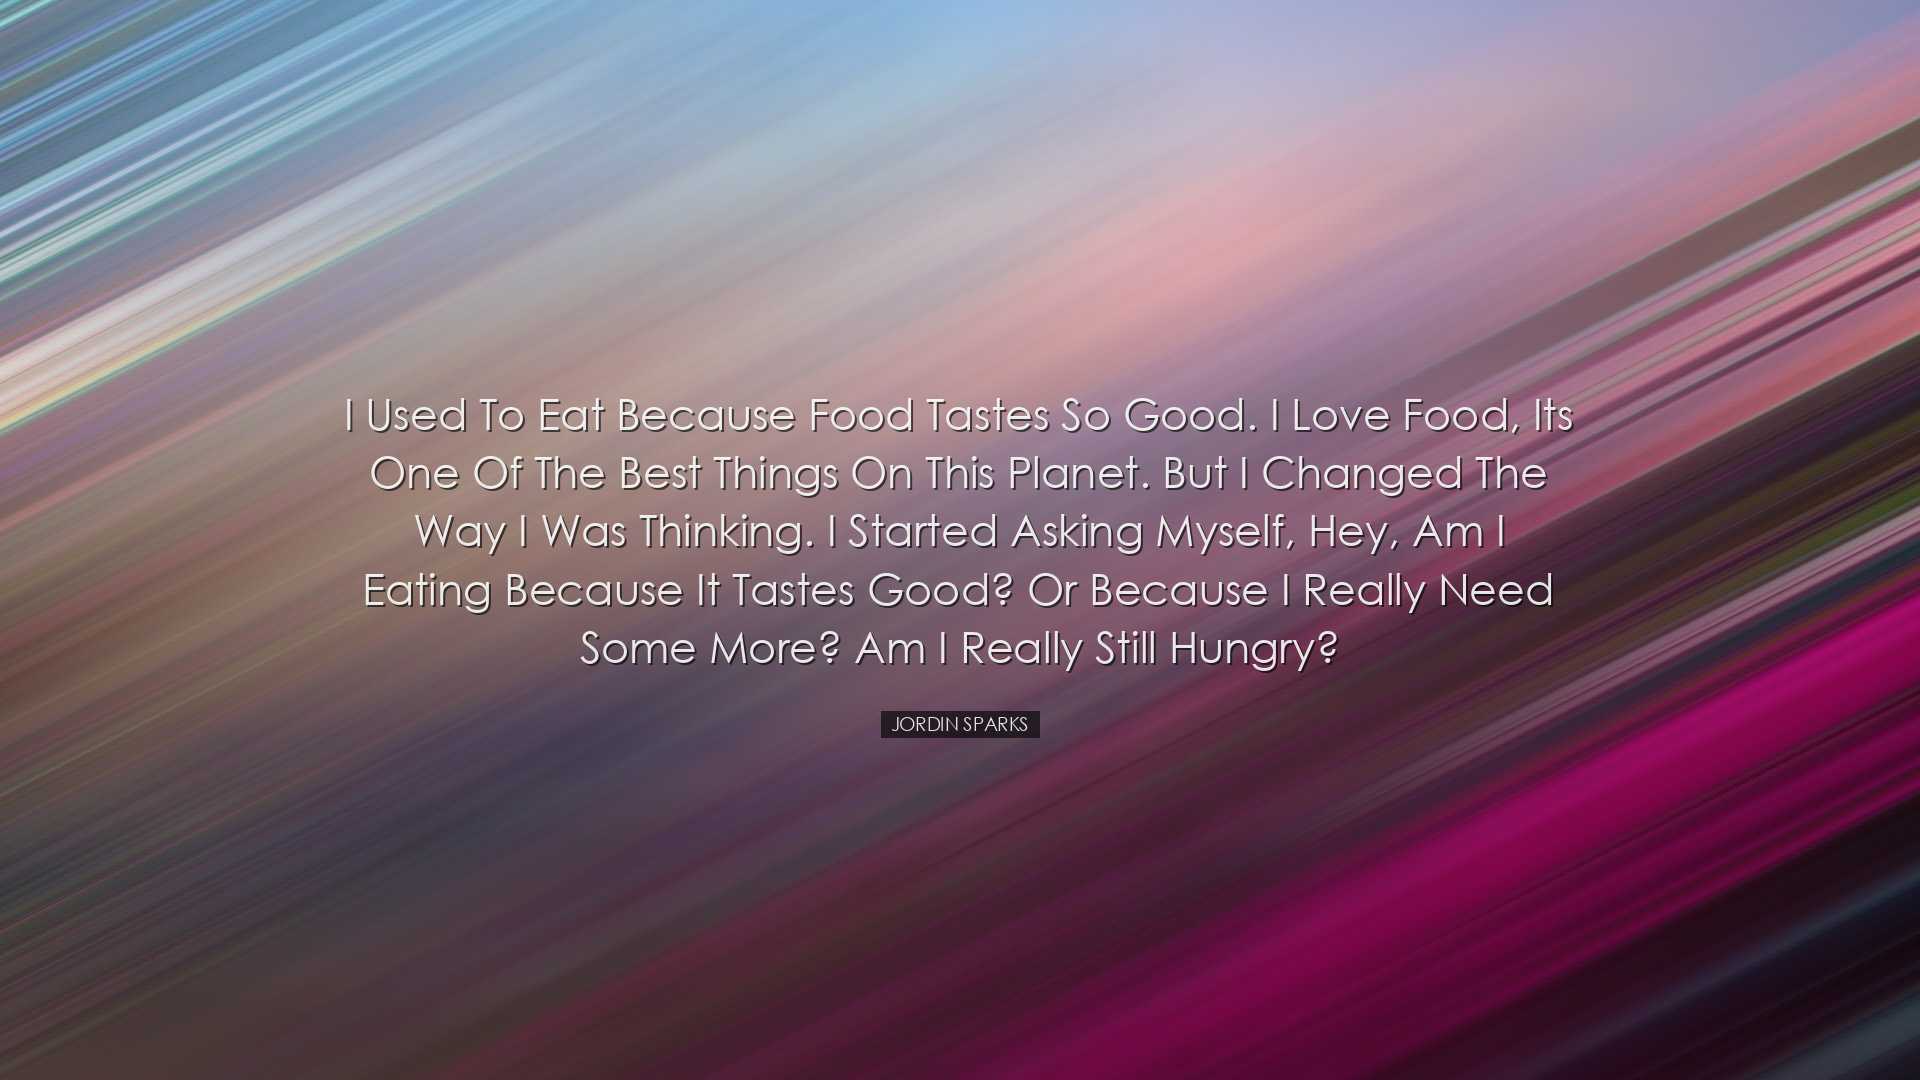 I used to eat because food tastes so good. I love food, its one of